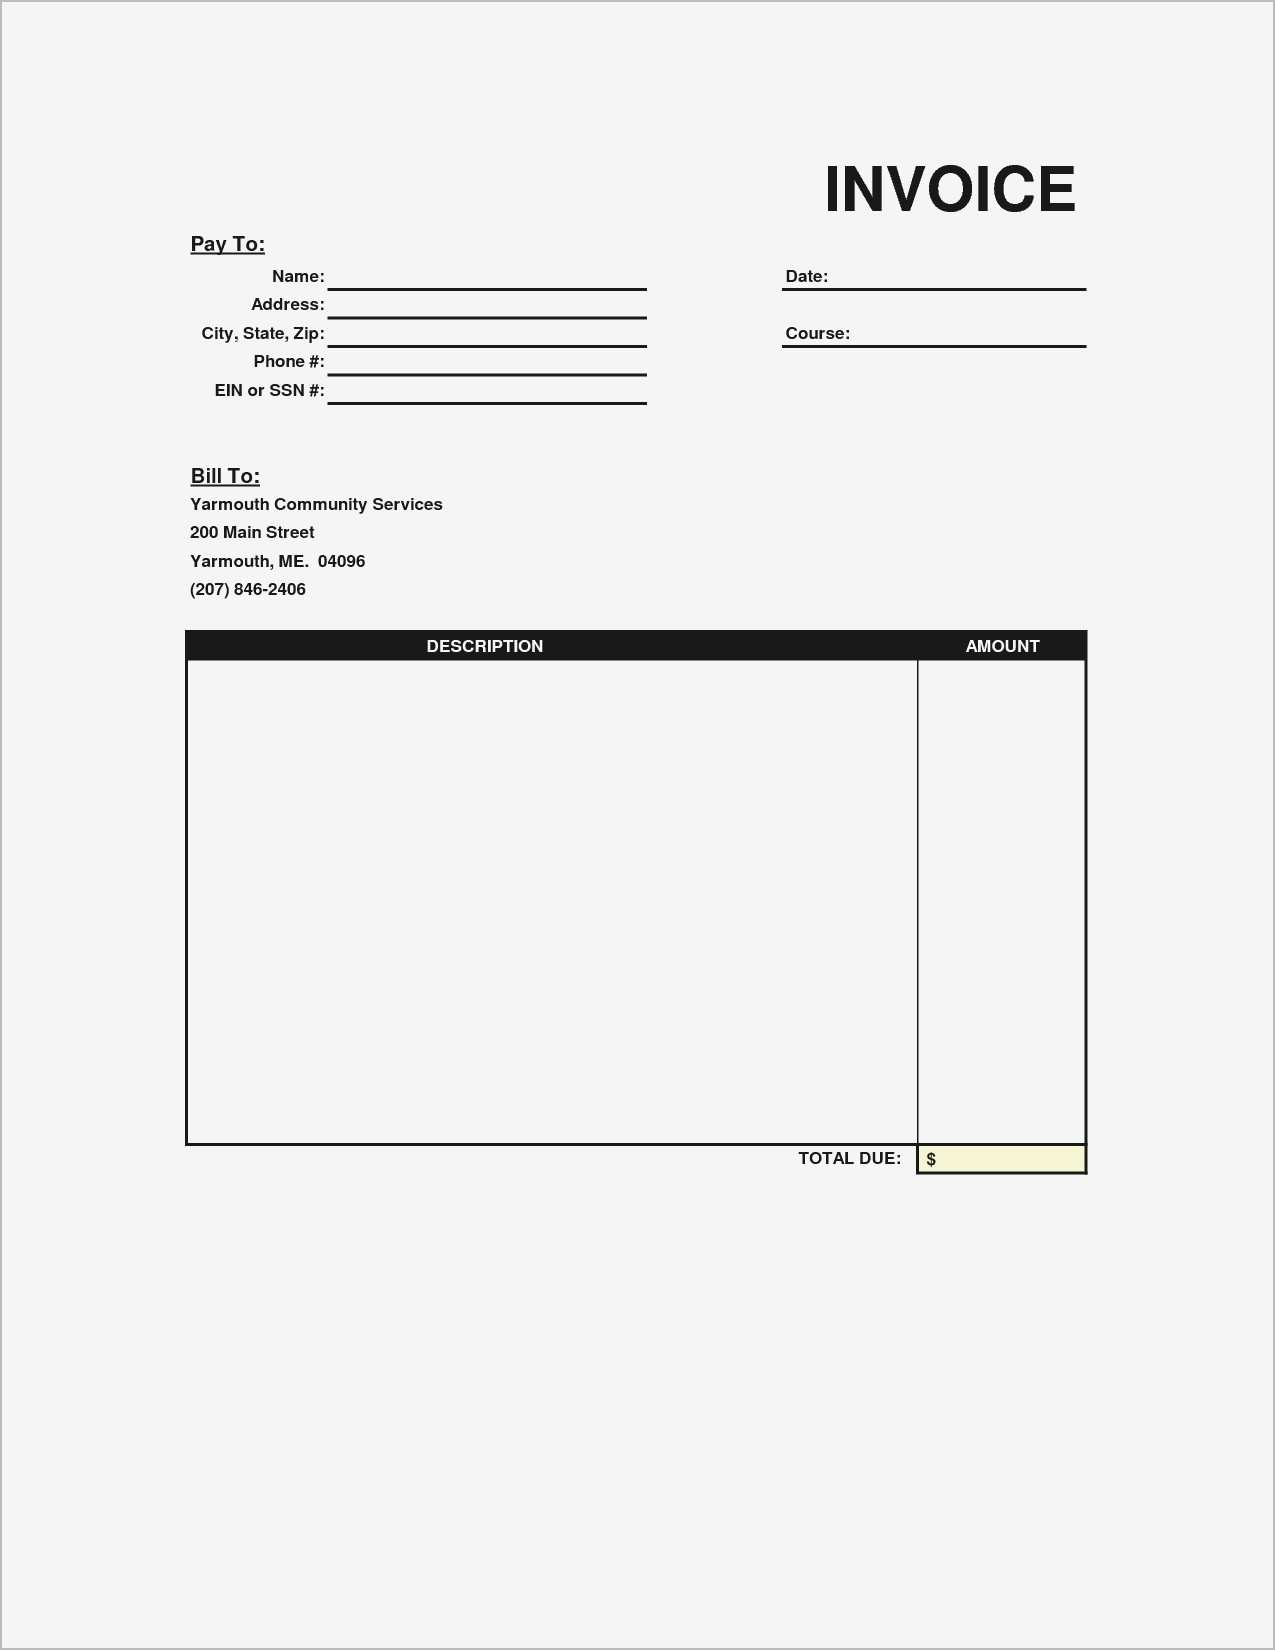 66 Adding Blank Invoice Template Xls for Ms Word by Blank Invoice Template Xls